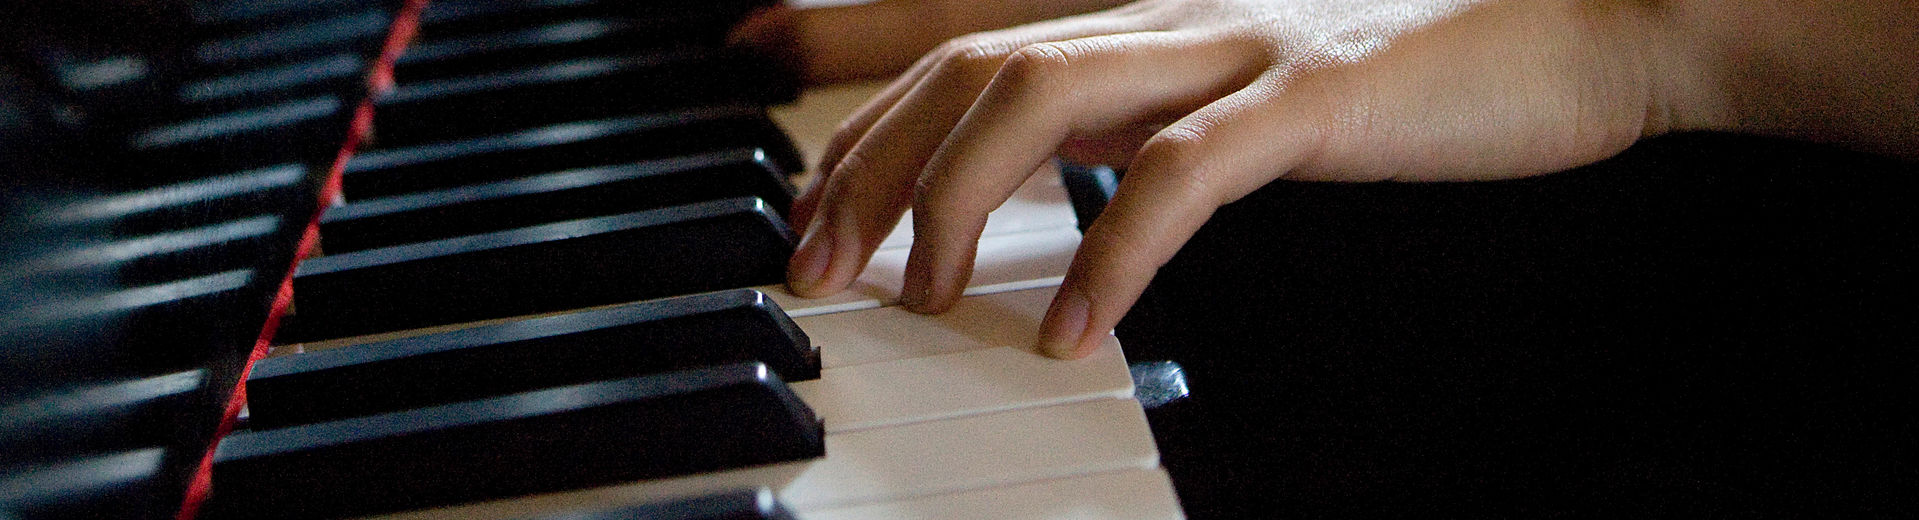 Six hands on piano keys playing a song